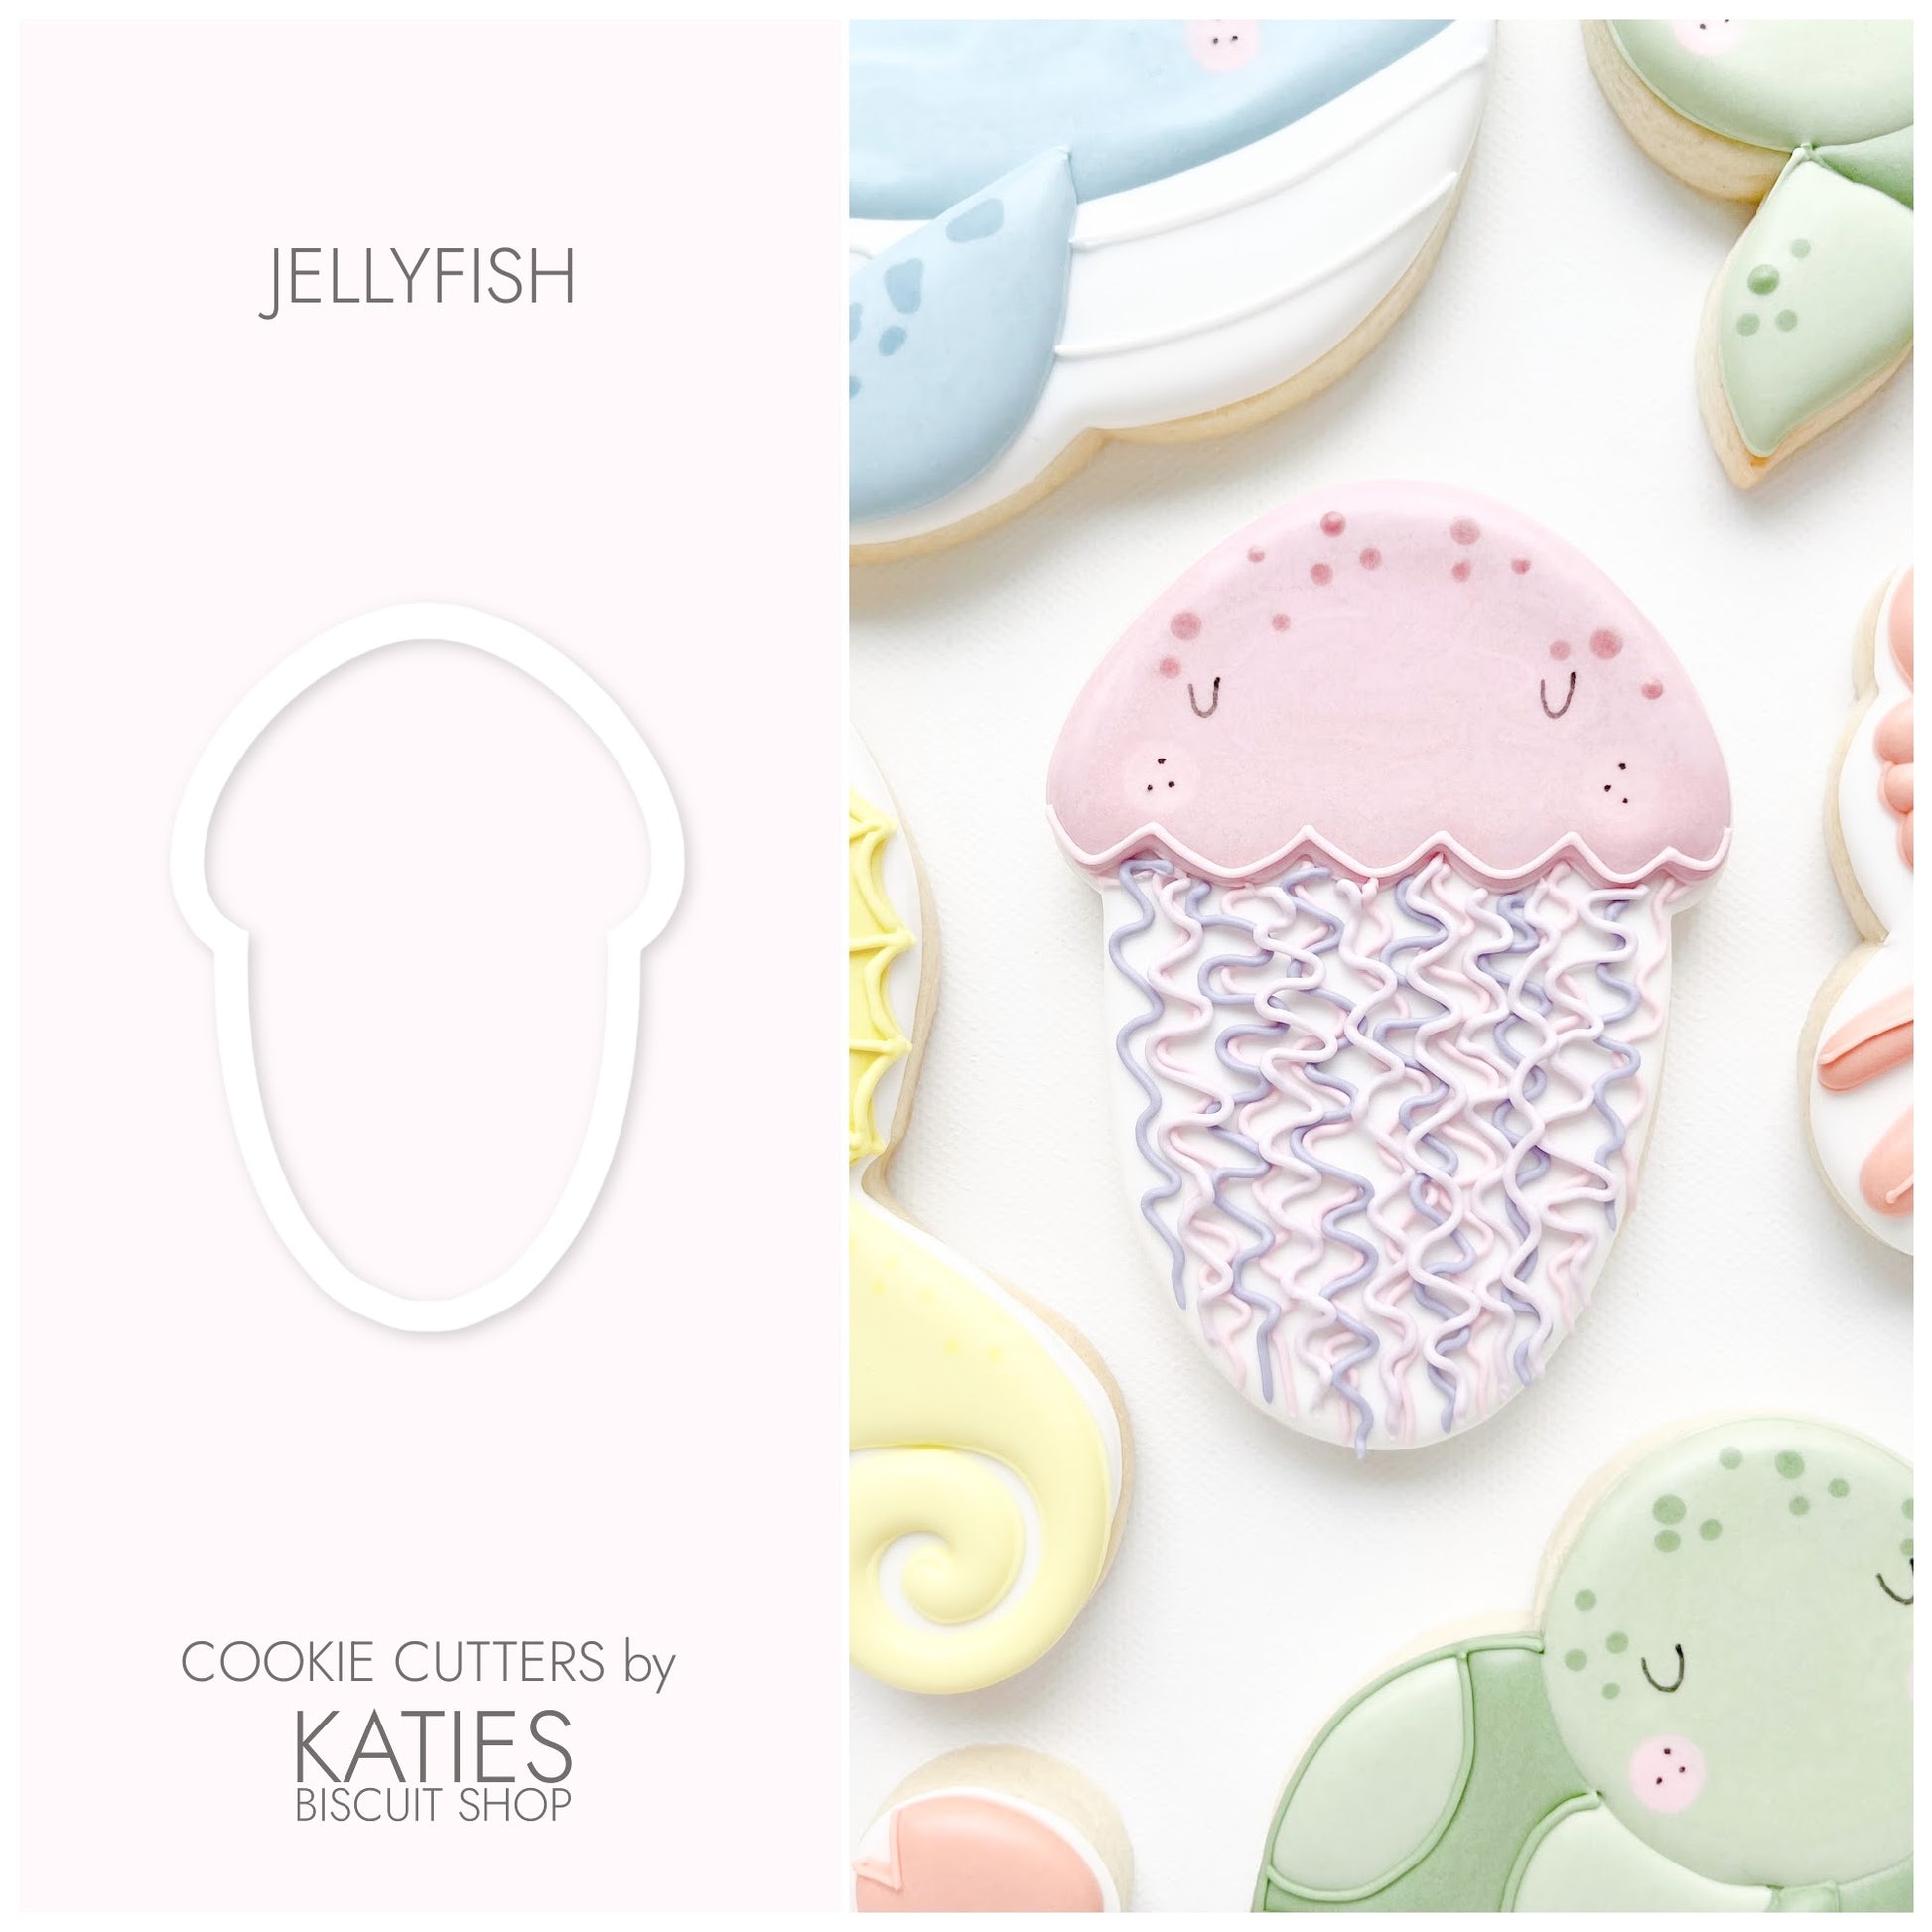 jelly fish 3d printed cookie cutter by katies biscuit shop